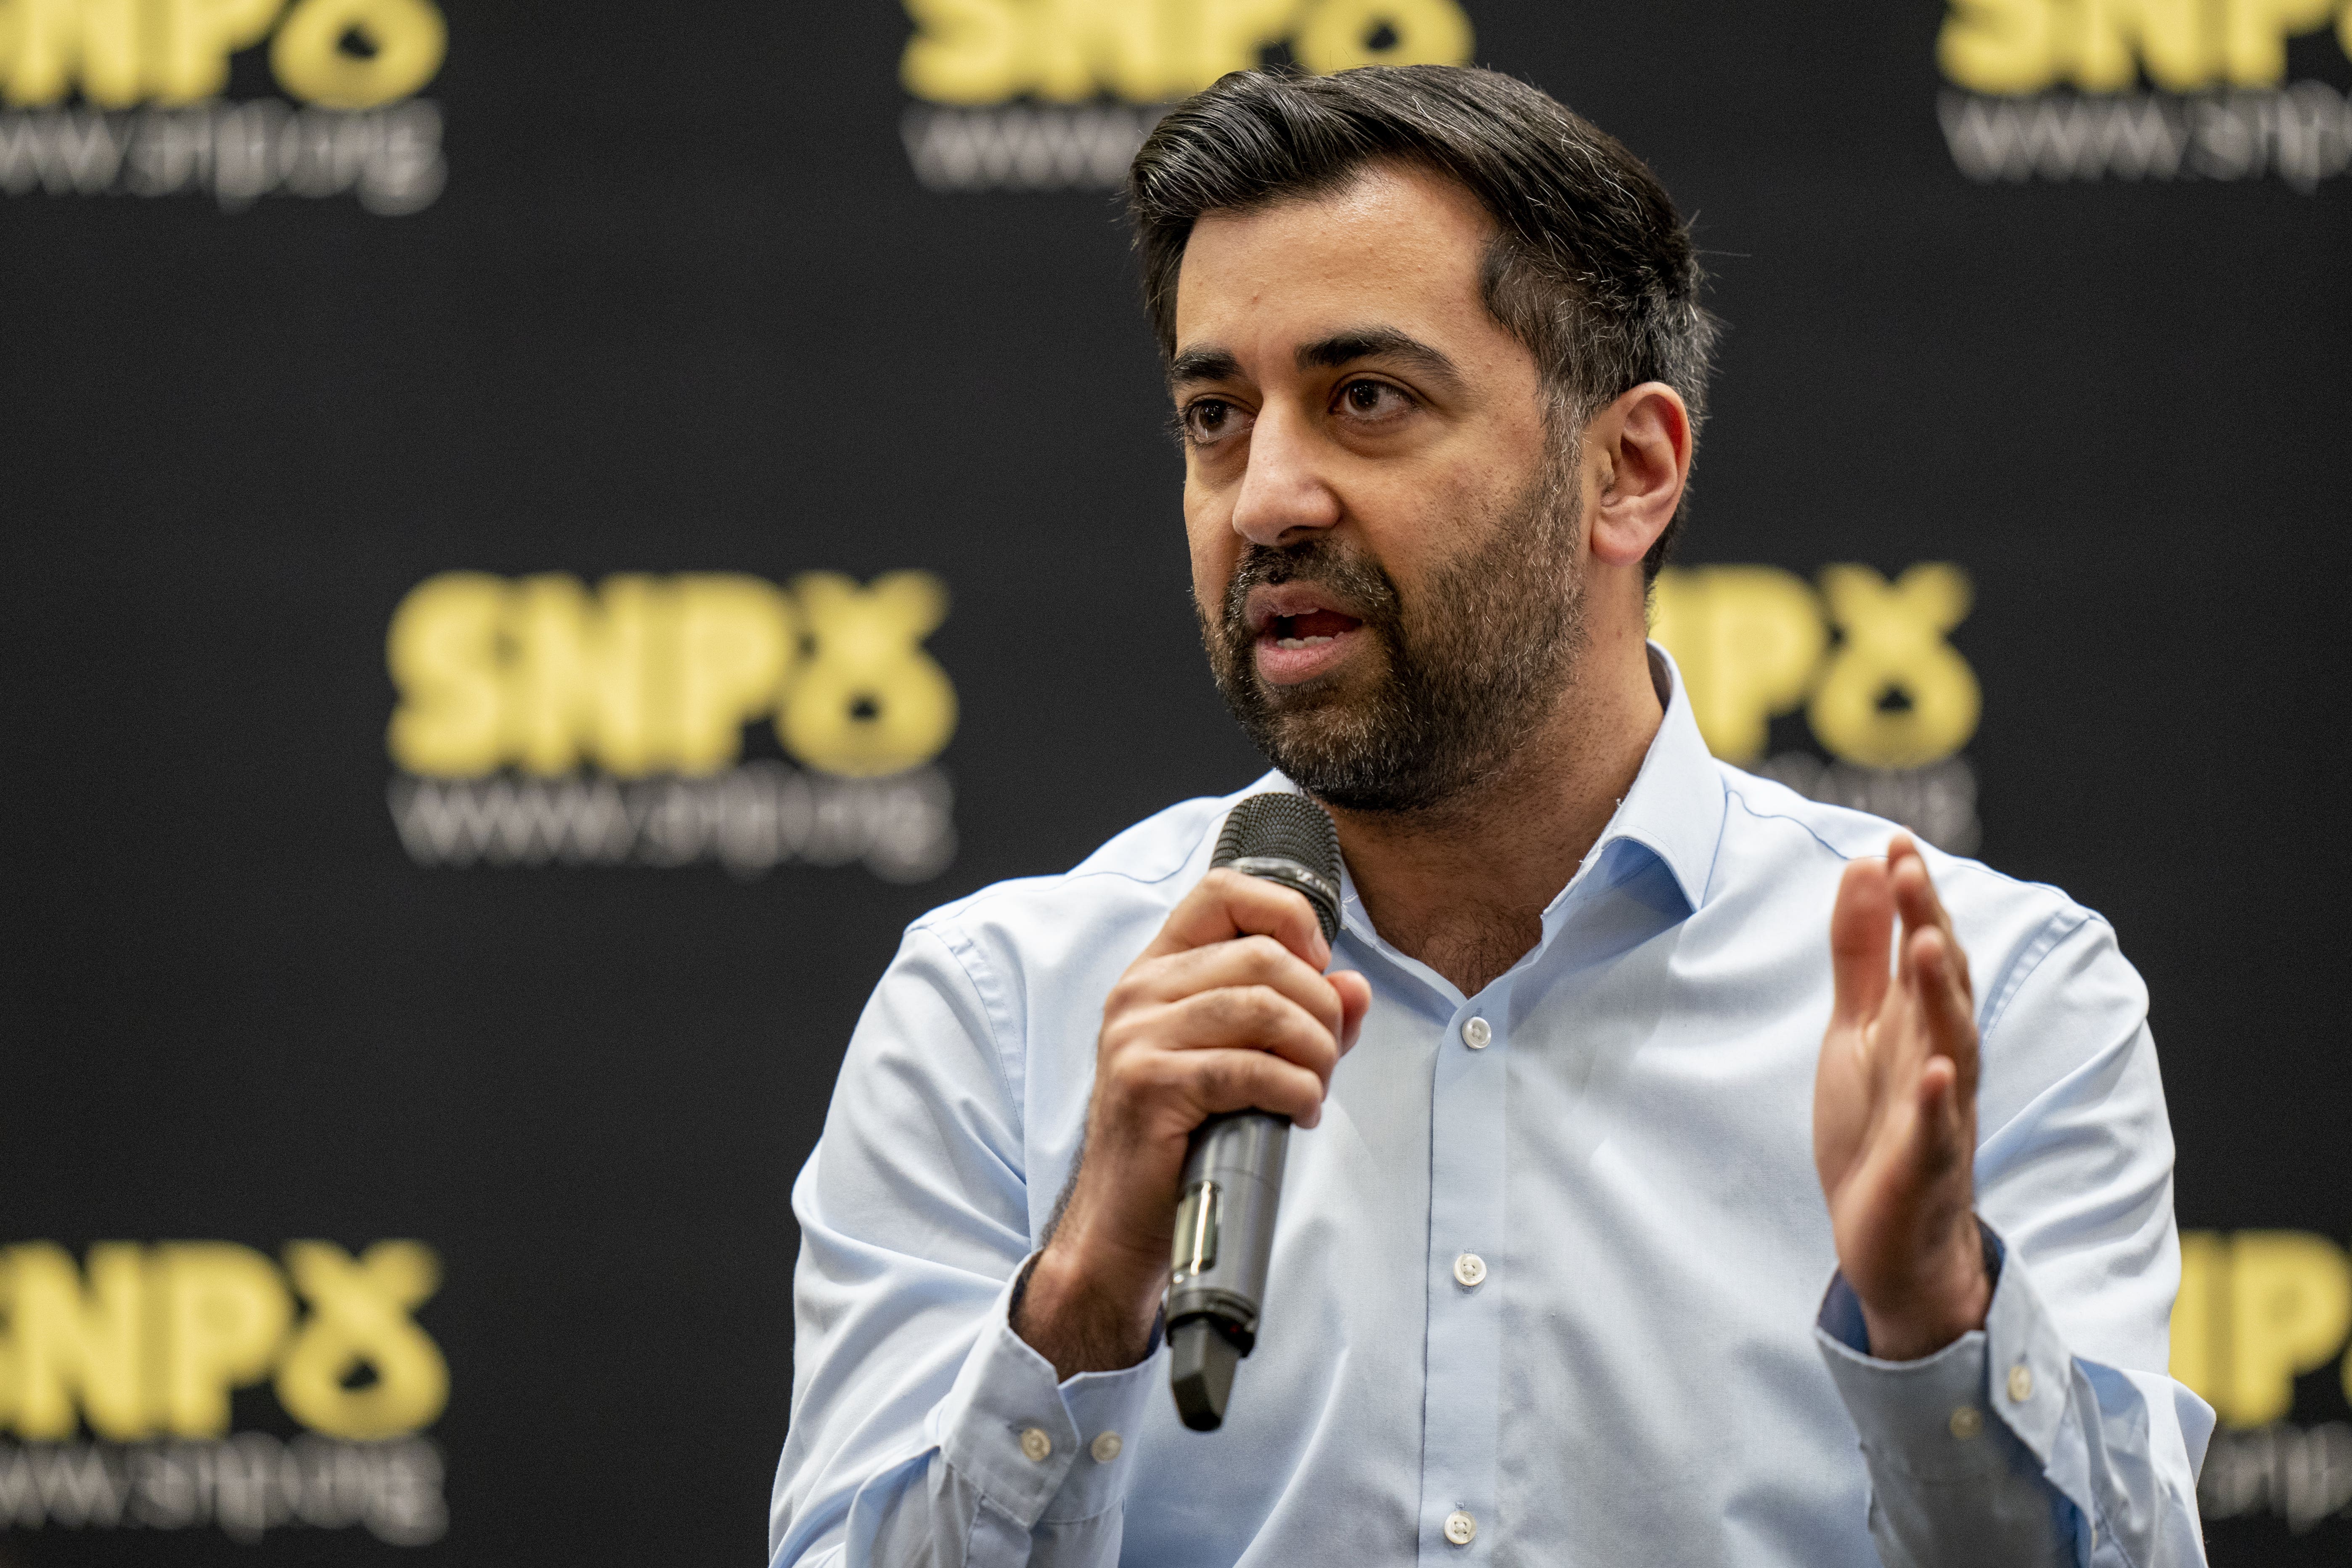 Humza Yousaf said the arrest marked a ‘difficult day’ for the party